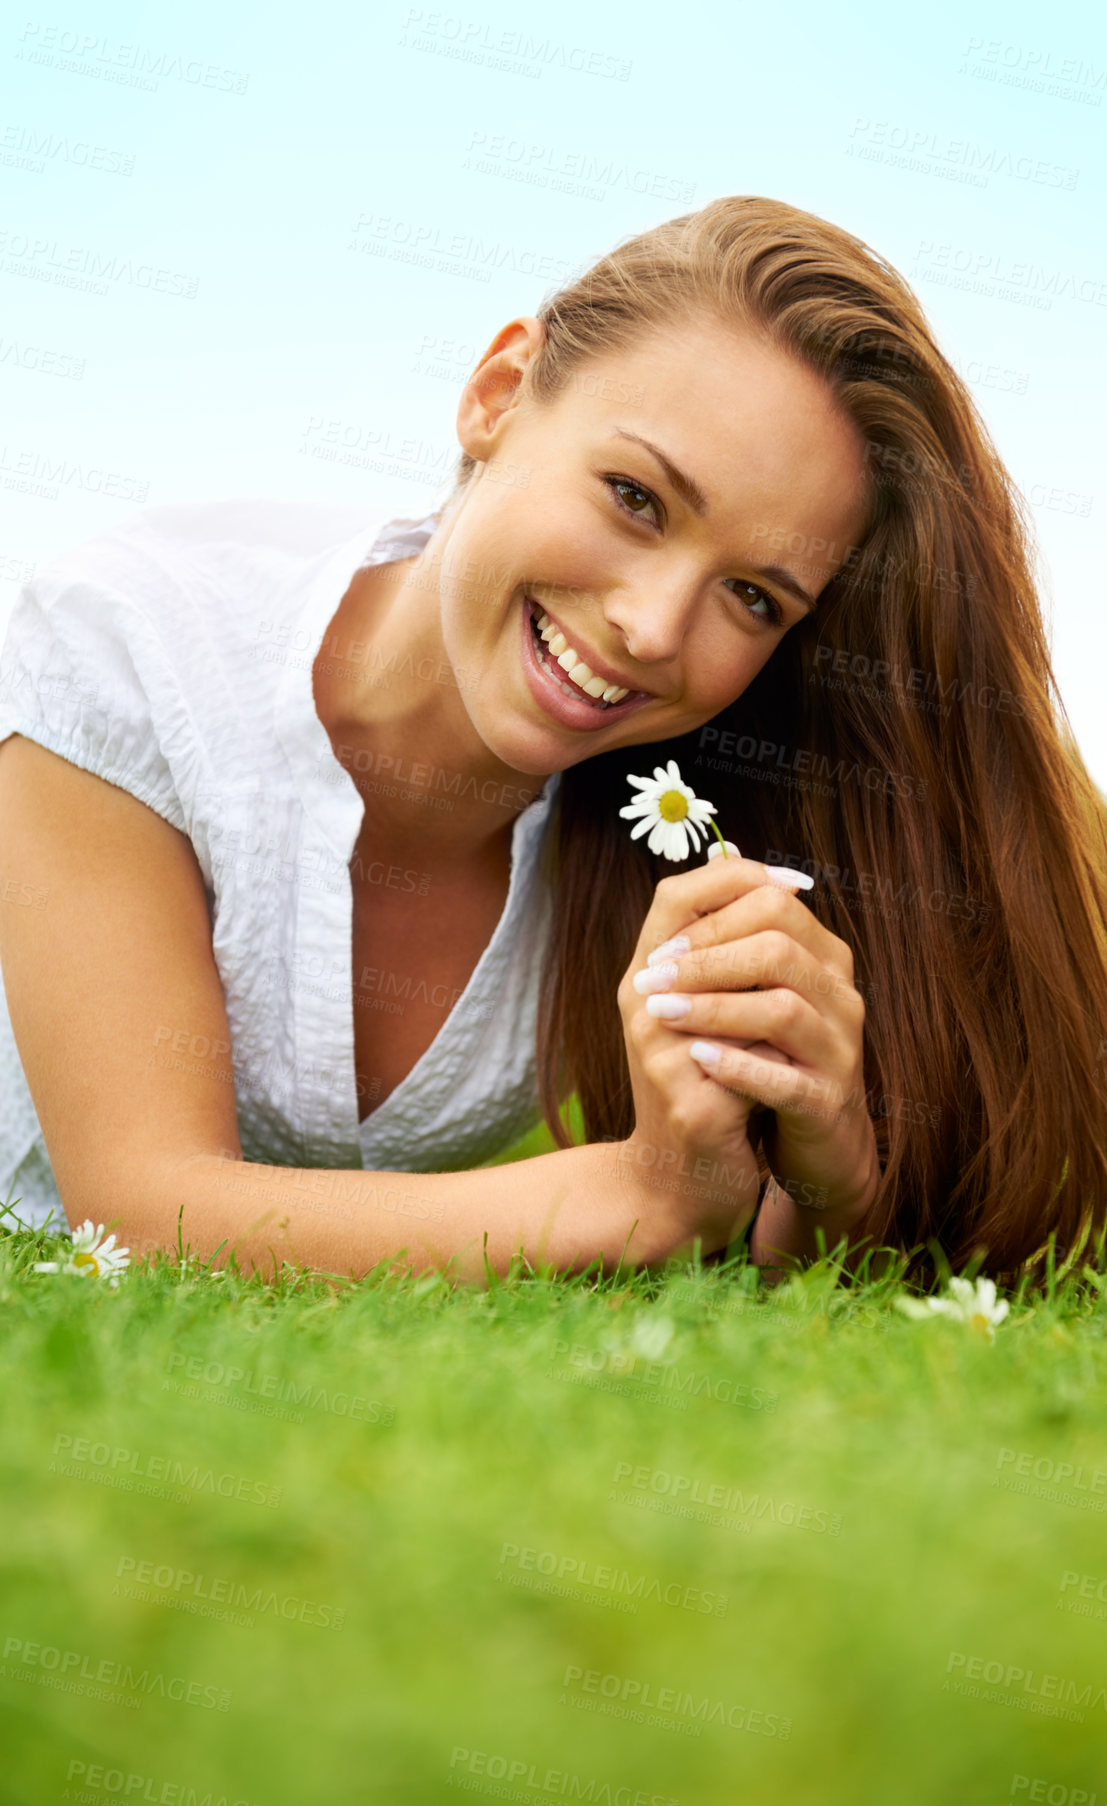 Buy stock photo Portrait, happy and woman with daisy on grass, lying down on field and enjoying spring on vacation outdoor. Smile, flower plant and beauty of female person relaxing, mockup and having fun in nature.